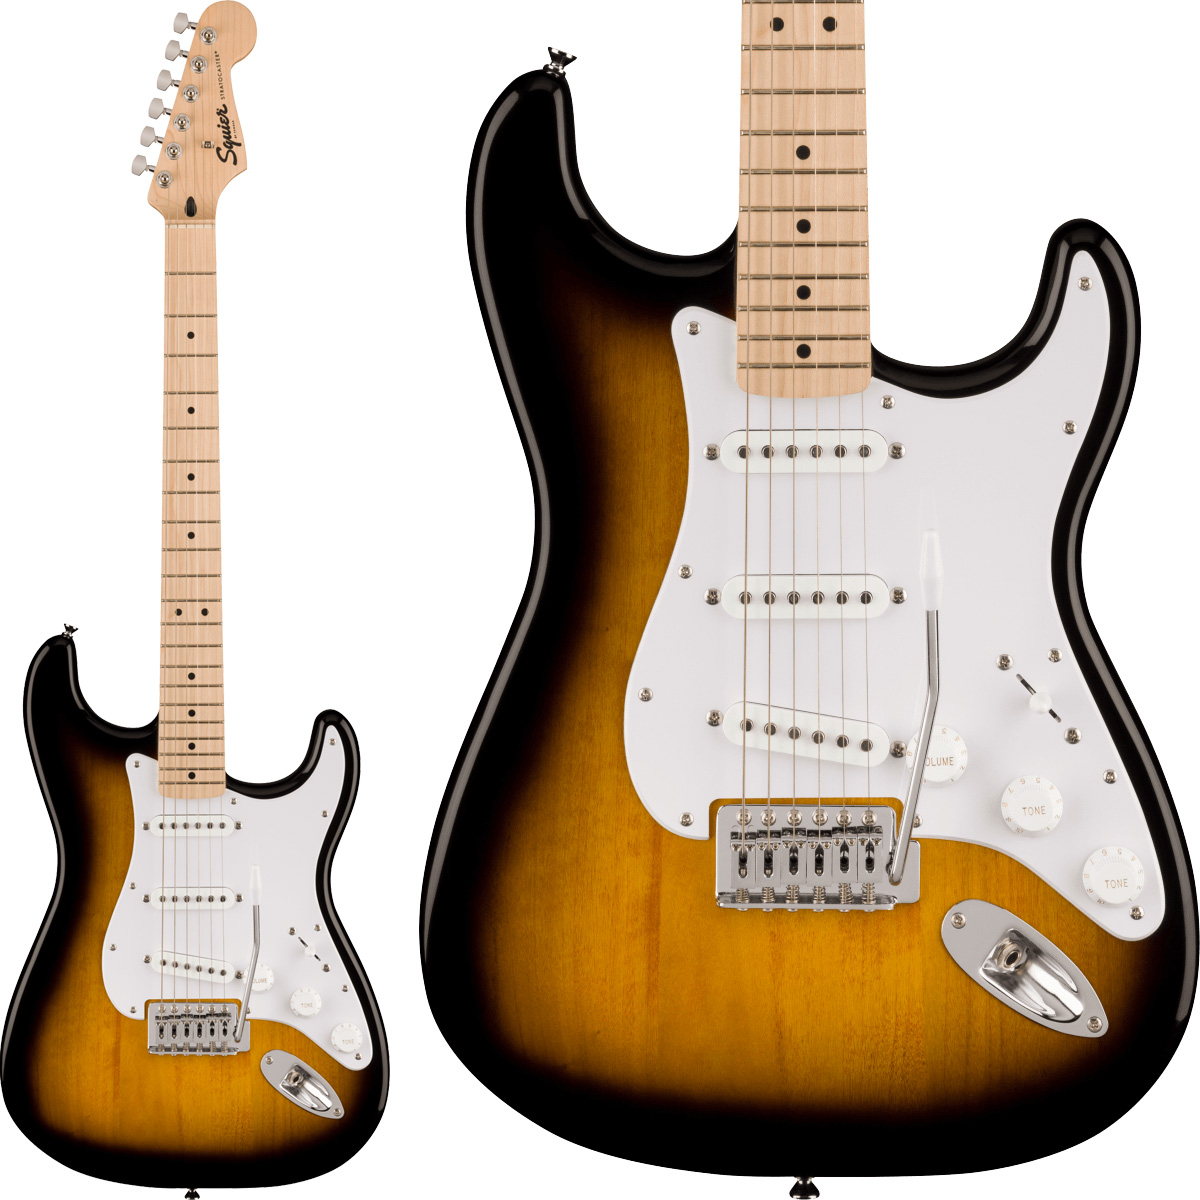 【4731】 Squier by fender Stratocaster